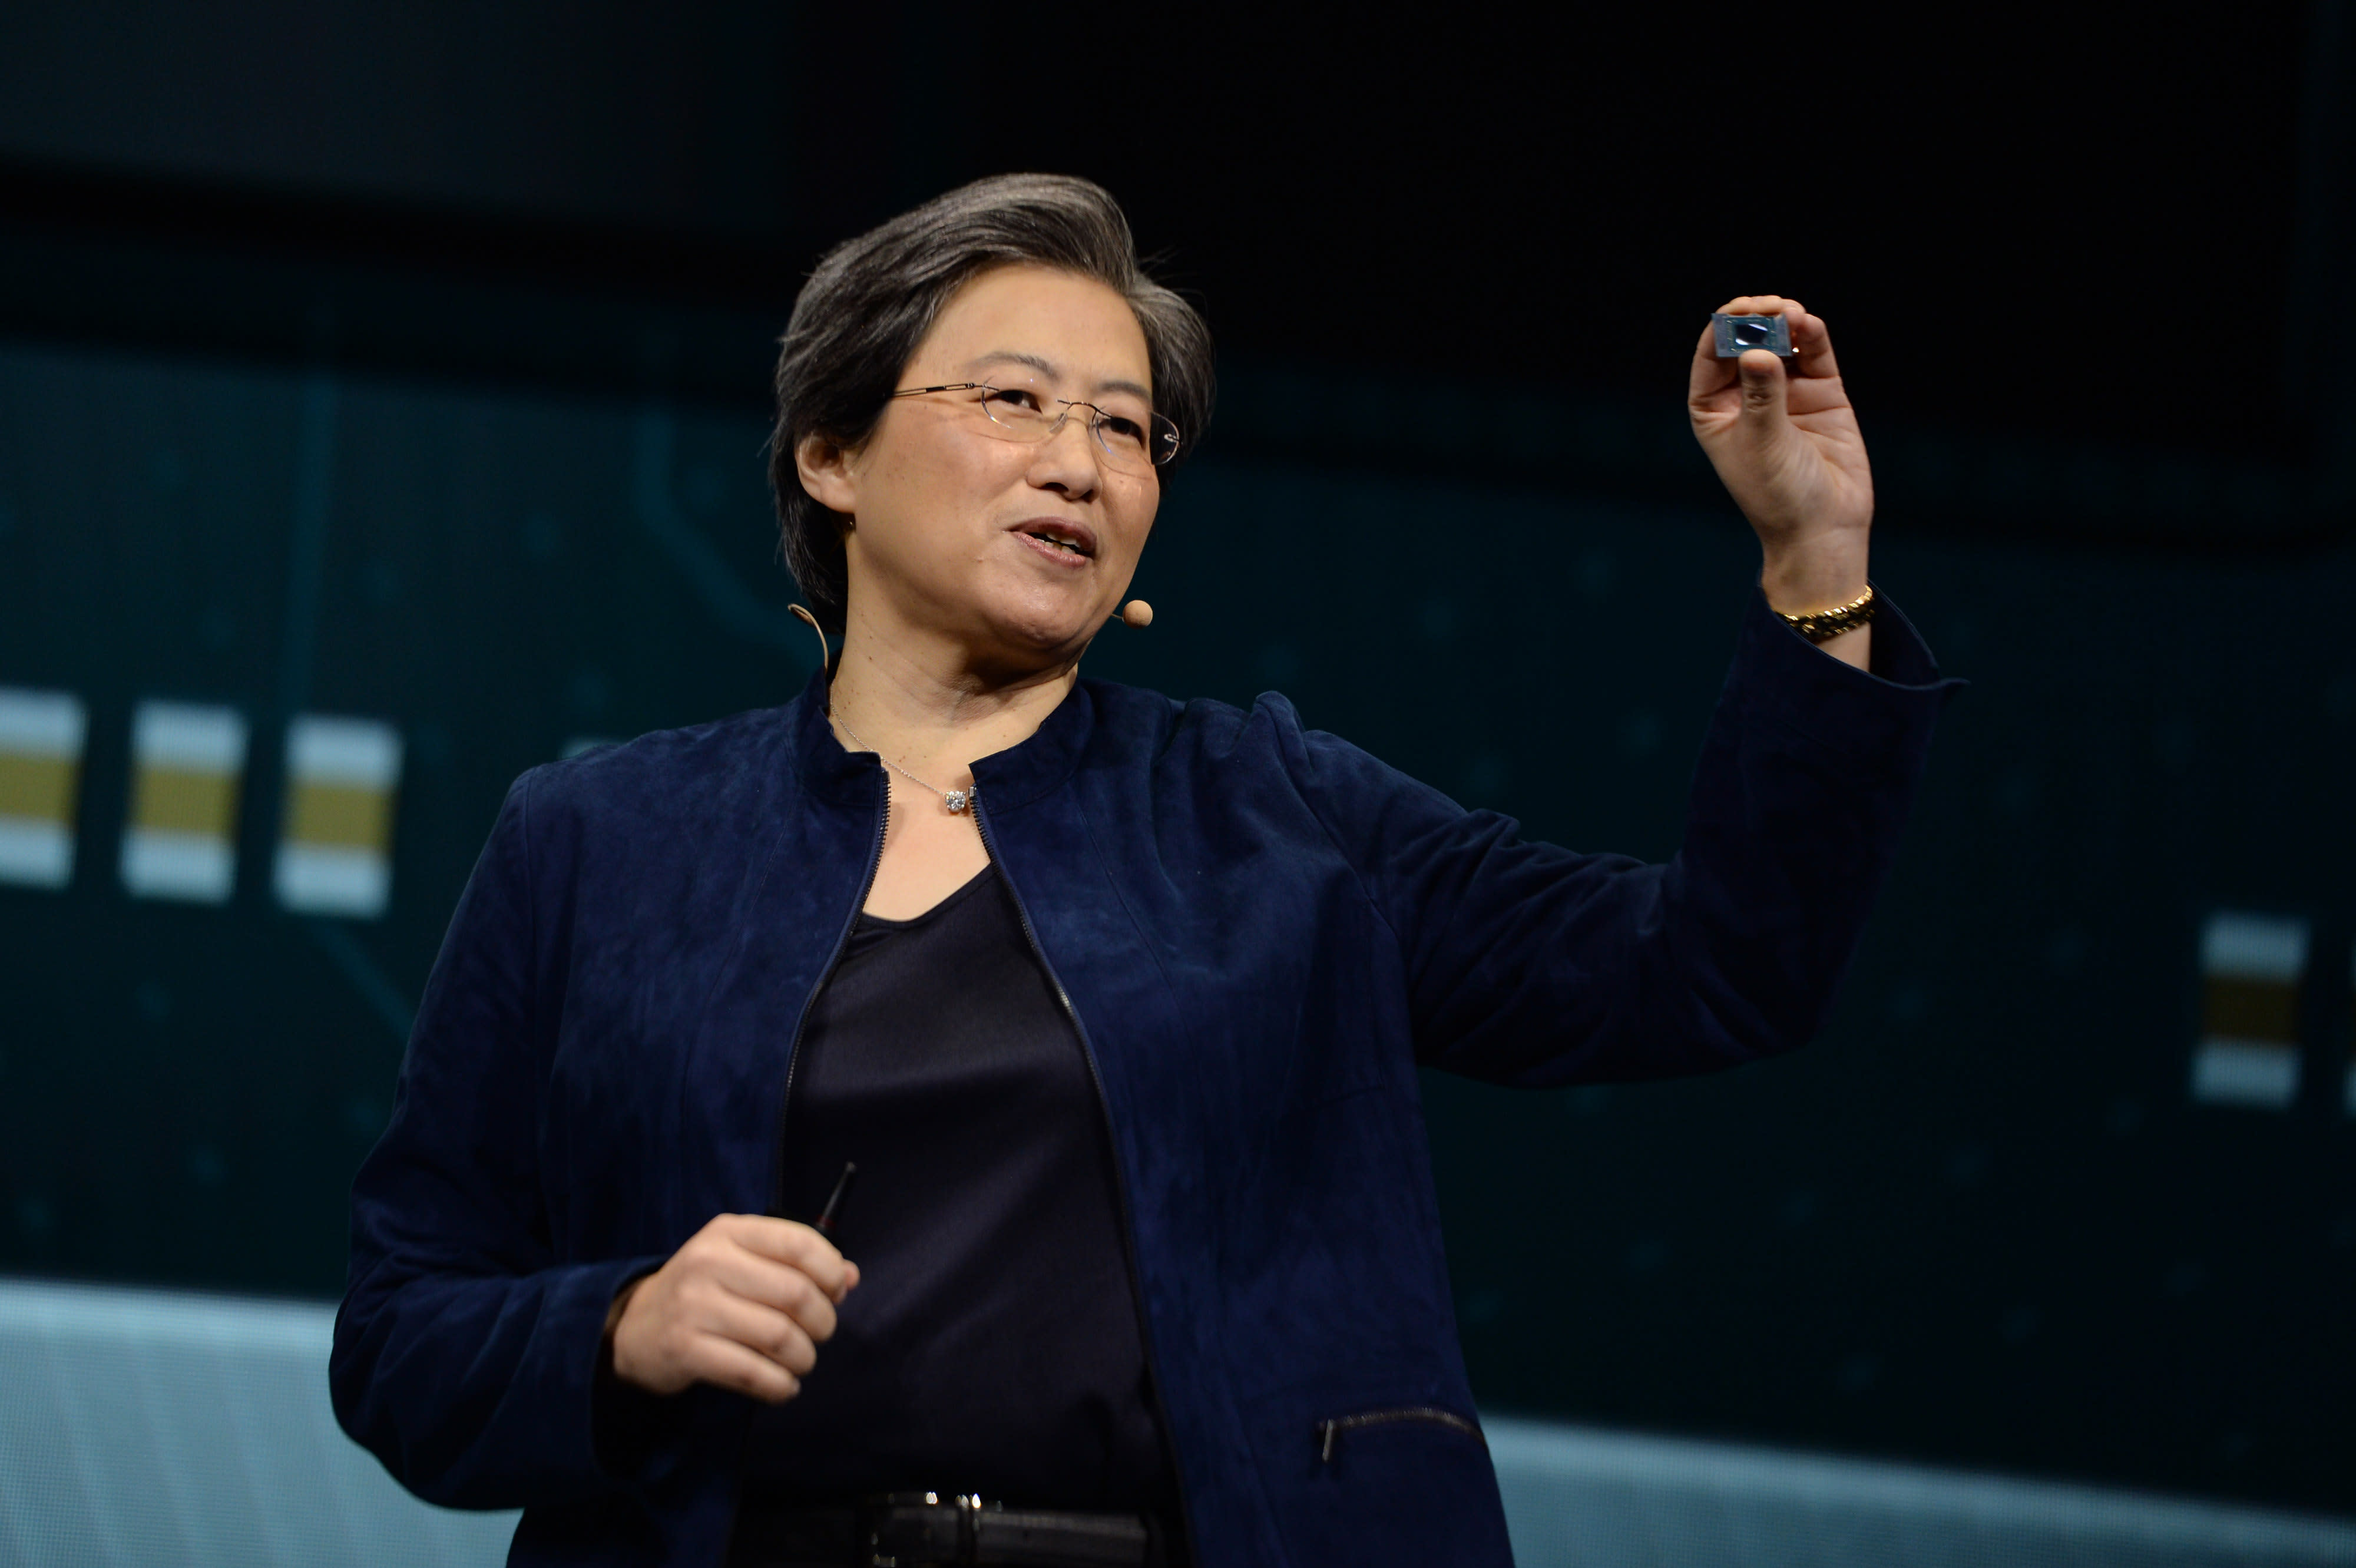 AMD beats on the top and bottom lines but is still a second-half story. Here's why